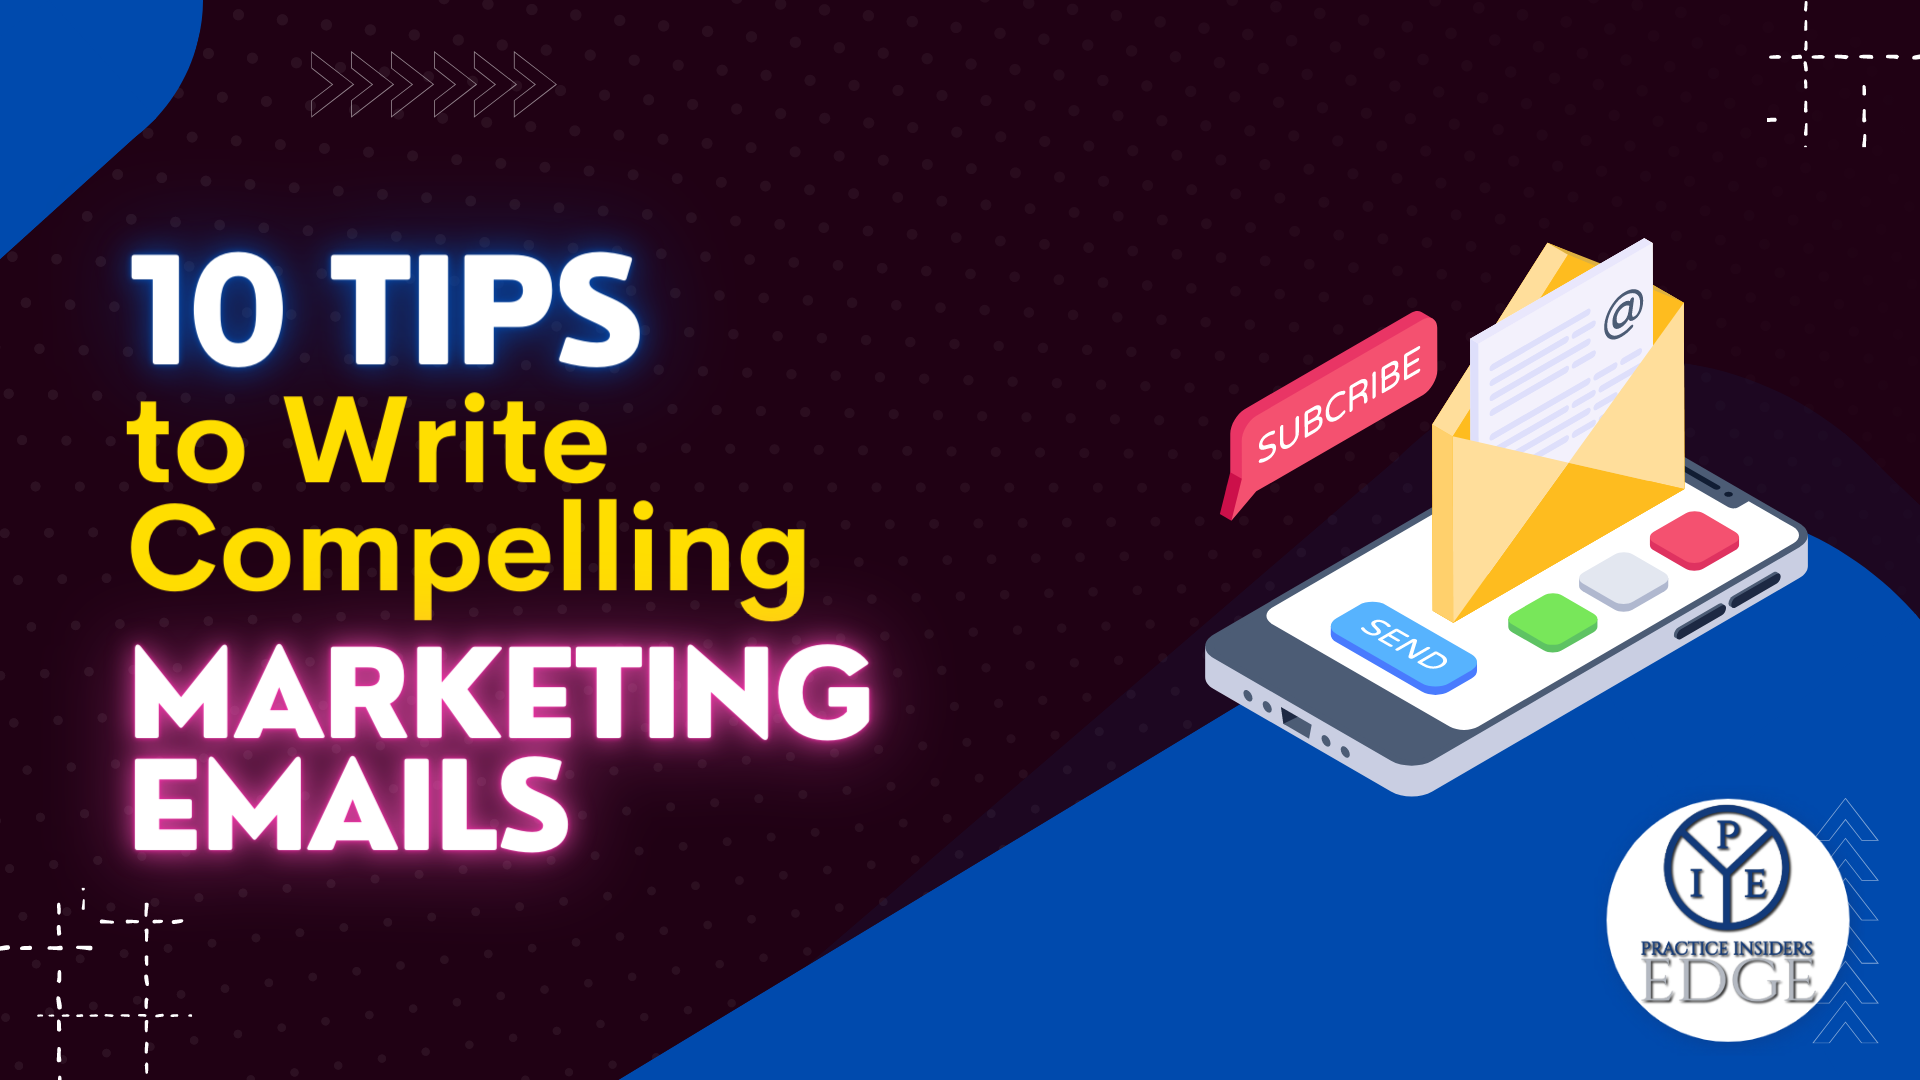 10 Tips to Write Compelling Marketing Emails